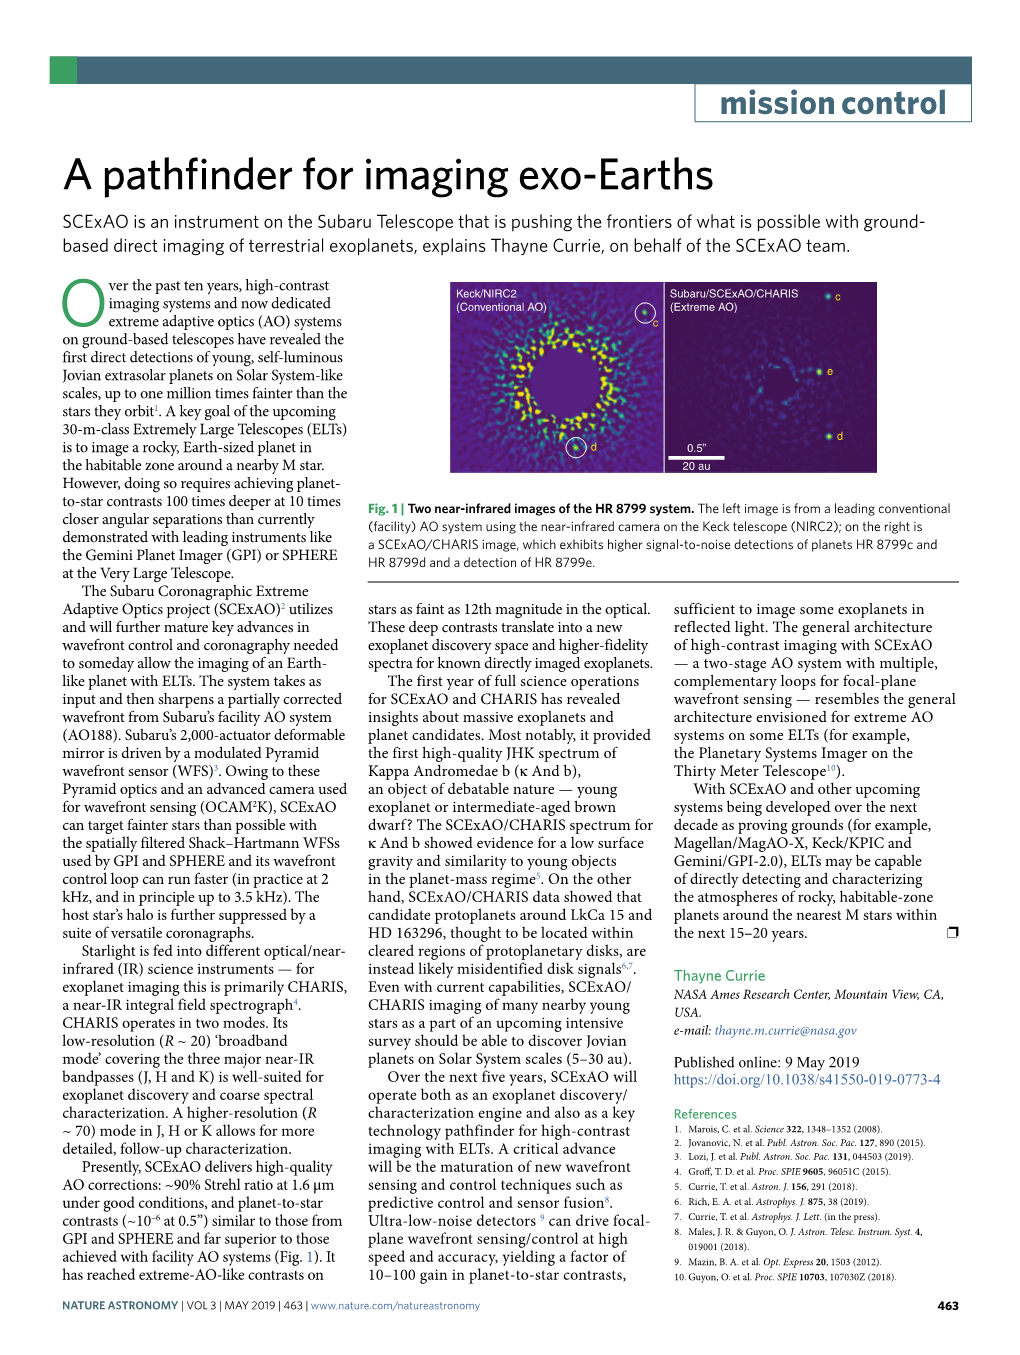 A Pathfinder for Imaging Exo-Earths